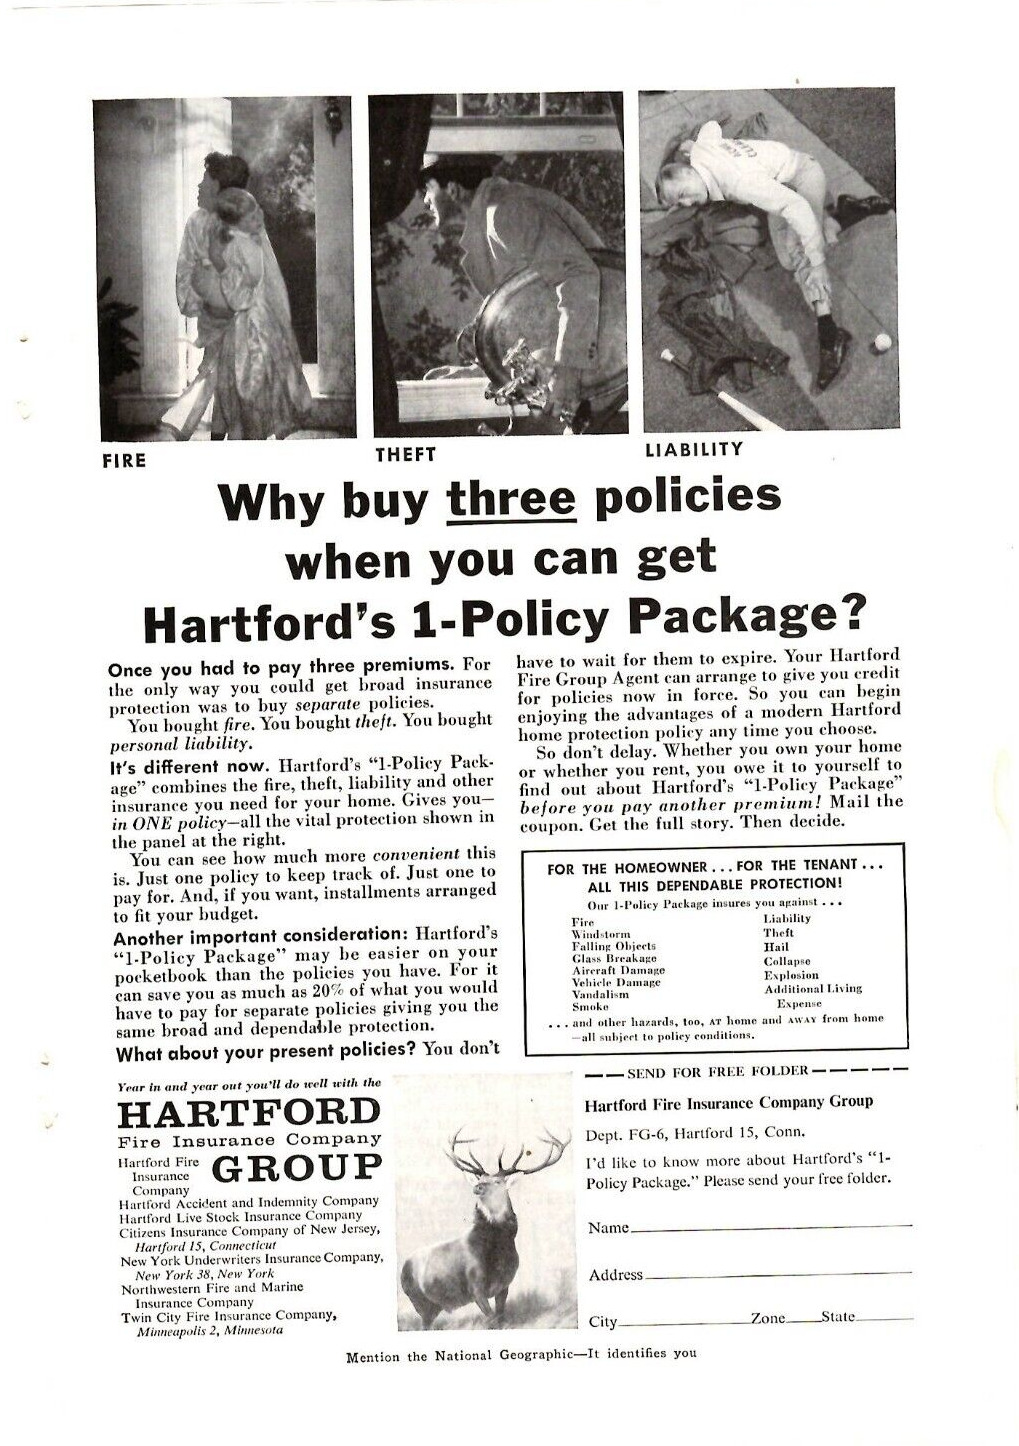 1958 Print Ad Hartford Fire Insurance Group Why buy three policies when you can